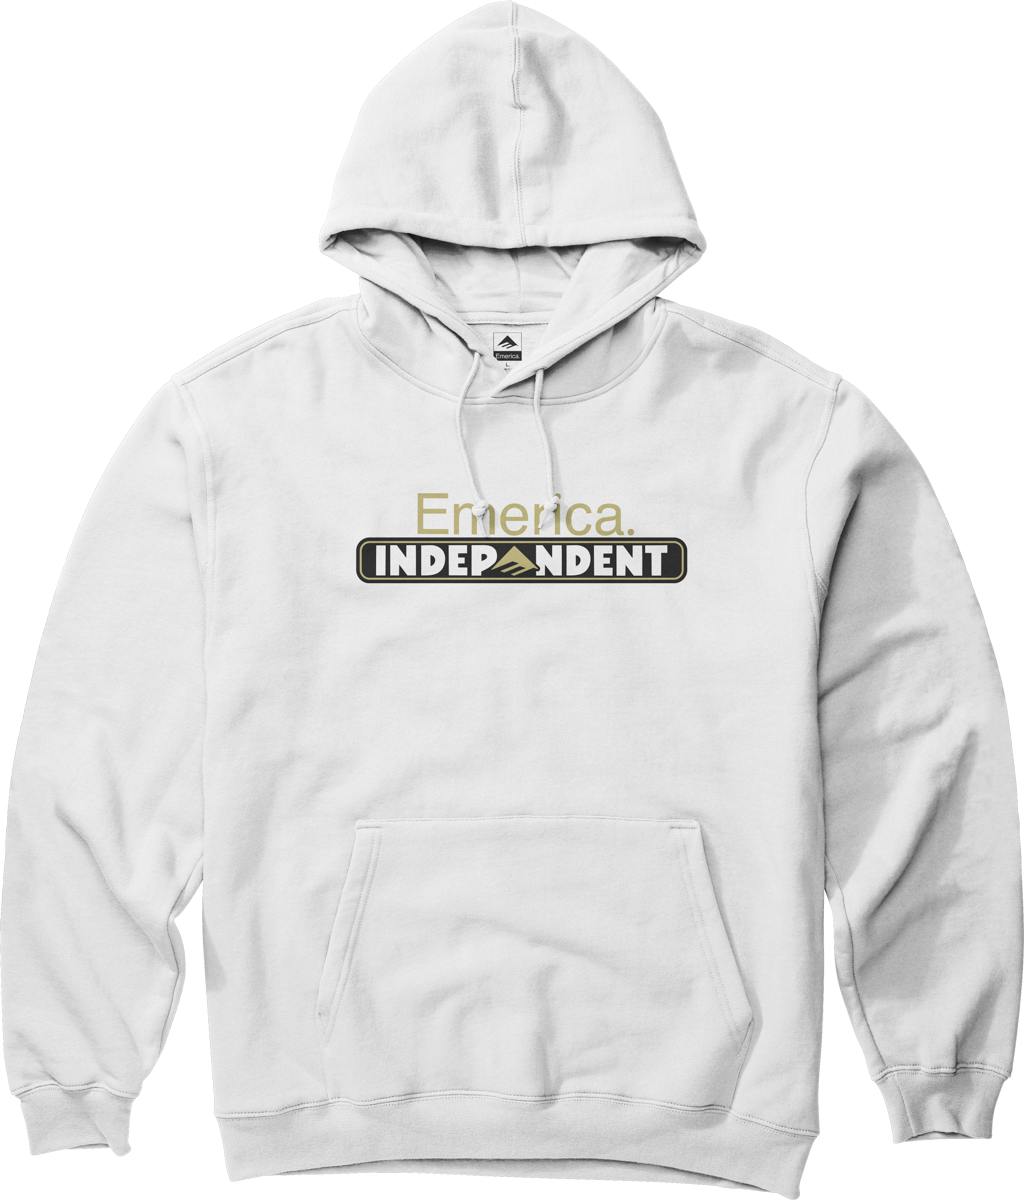 EMERICA X INDEPENDENT BAR PULLOVER